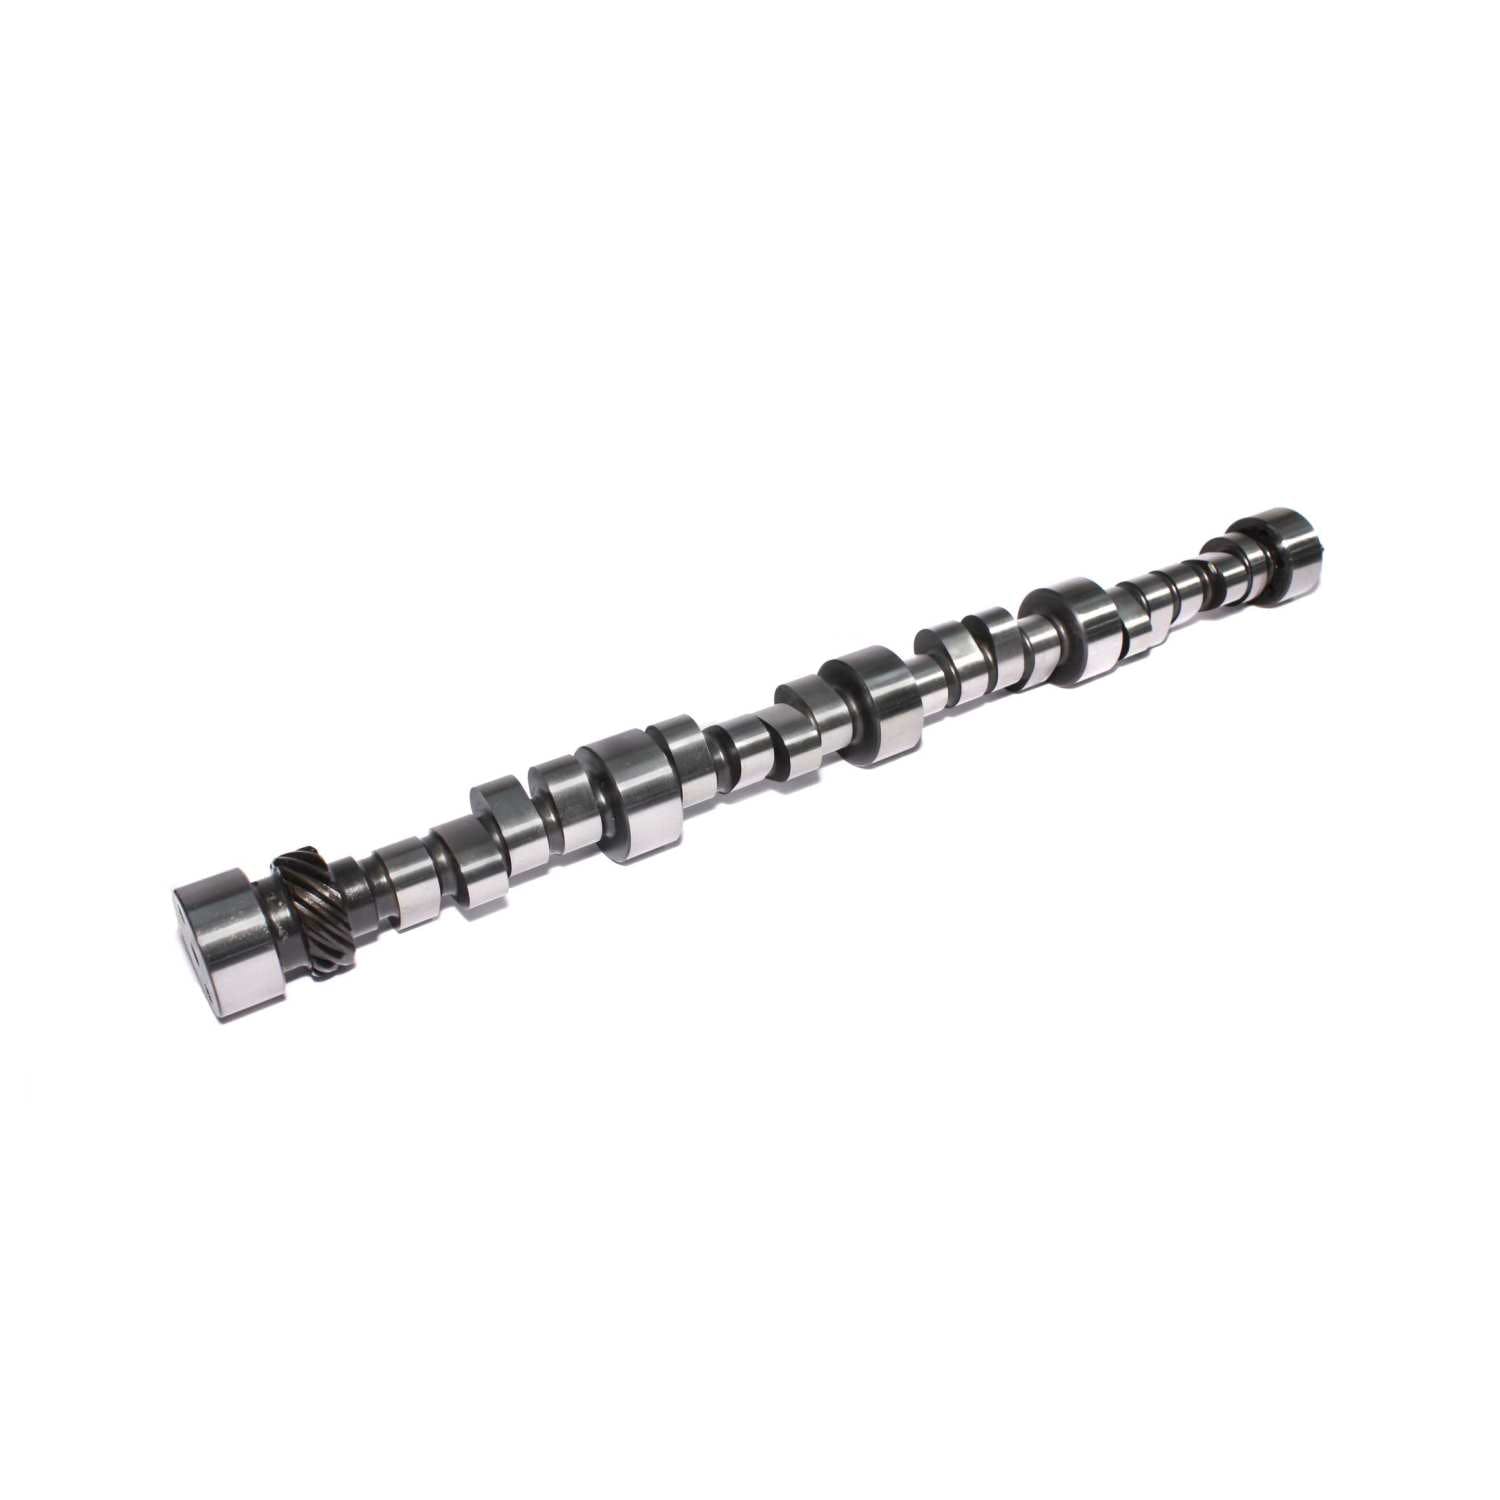 Competition Cams 11-703-9 Drag Race Camshaft